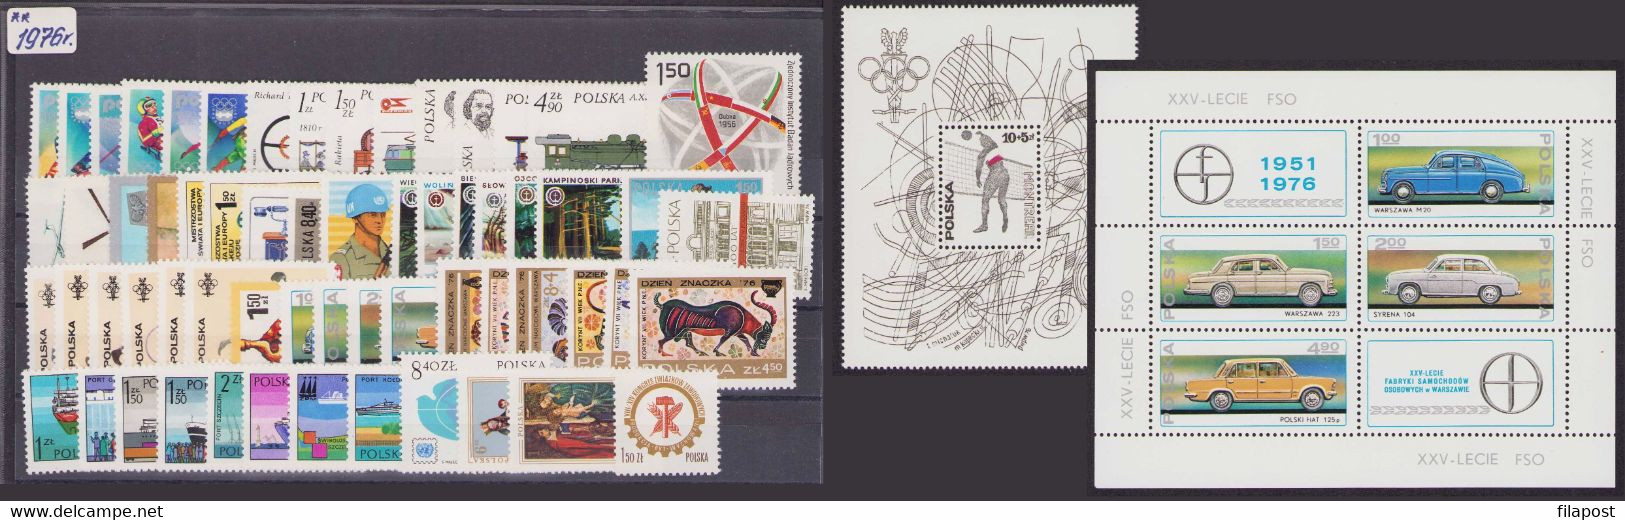 Poland 1976 Full Year / Car Factory In Warsaw, Fiat, Syrena / Sport, Volleyball, Olympics, Transport MNH** - Années Complètes